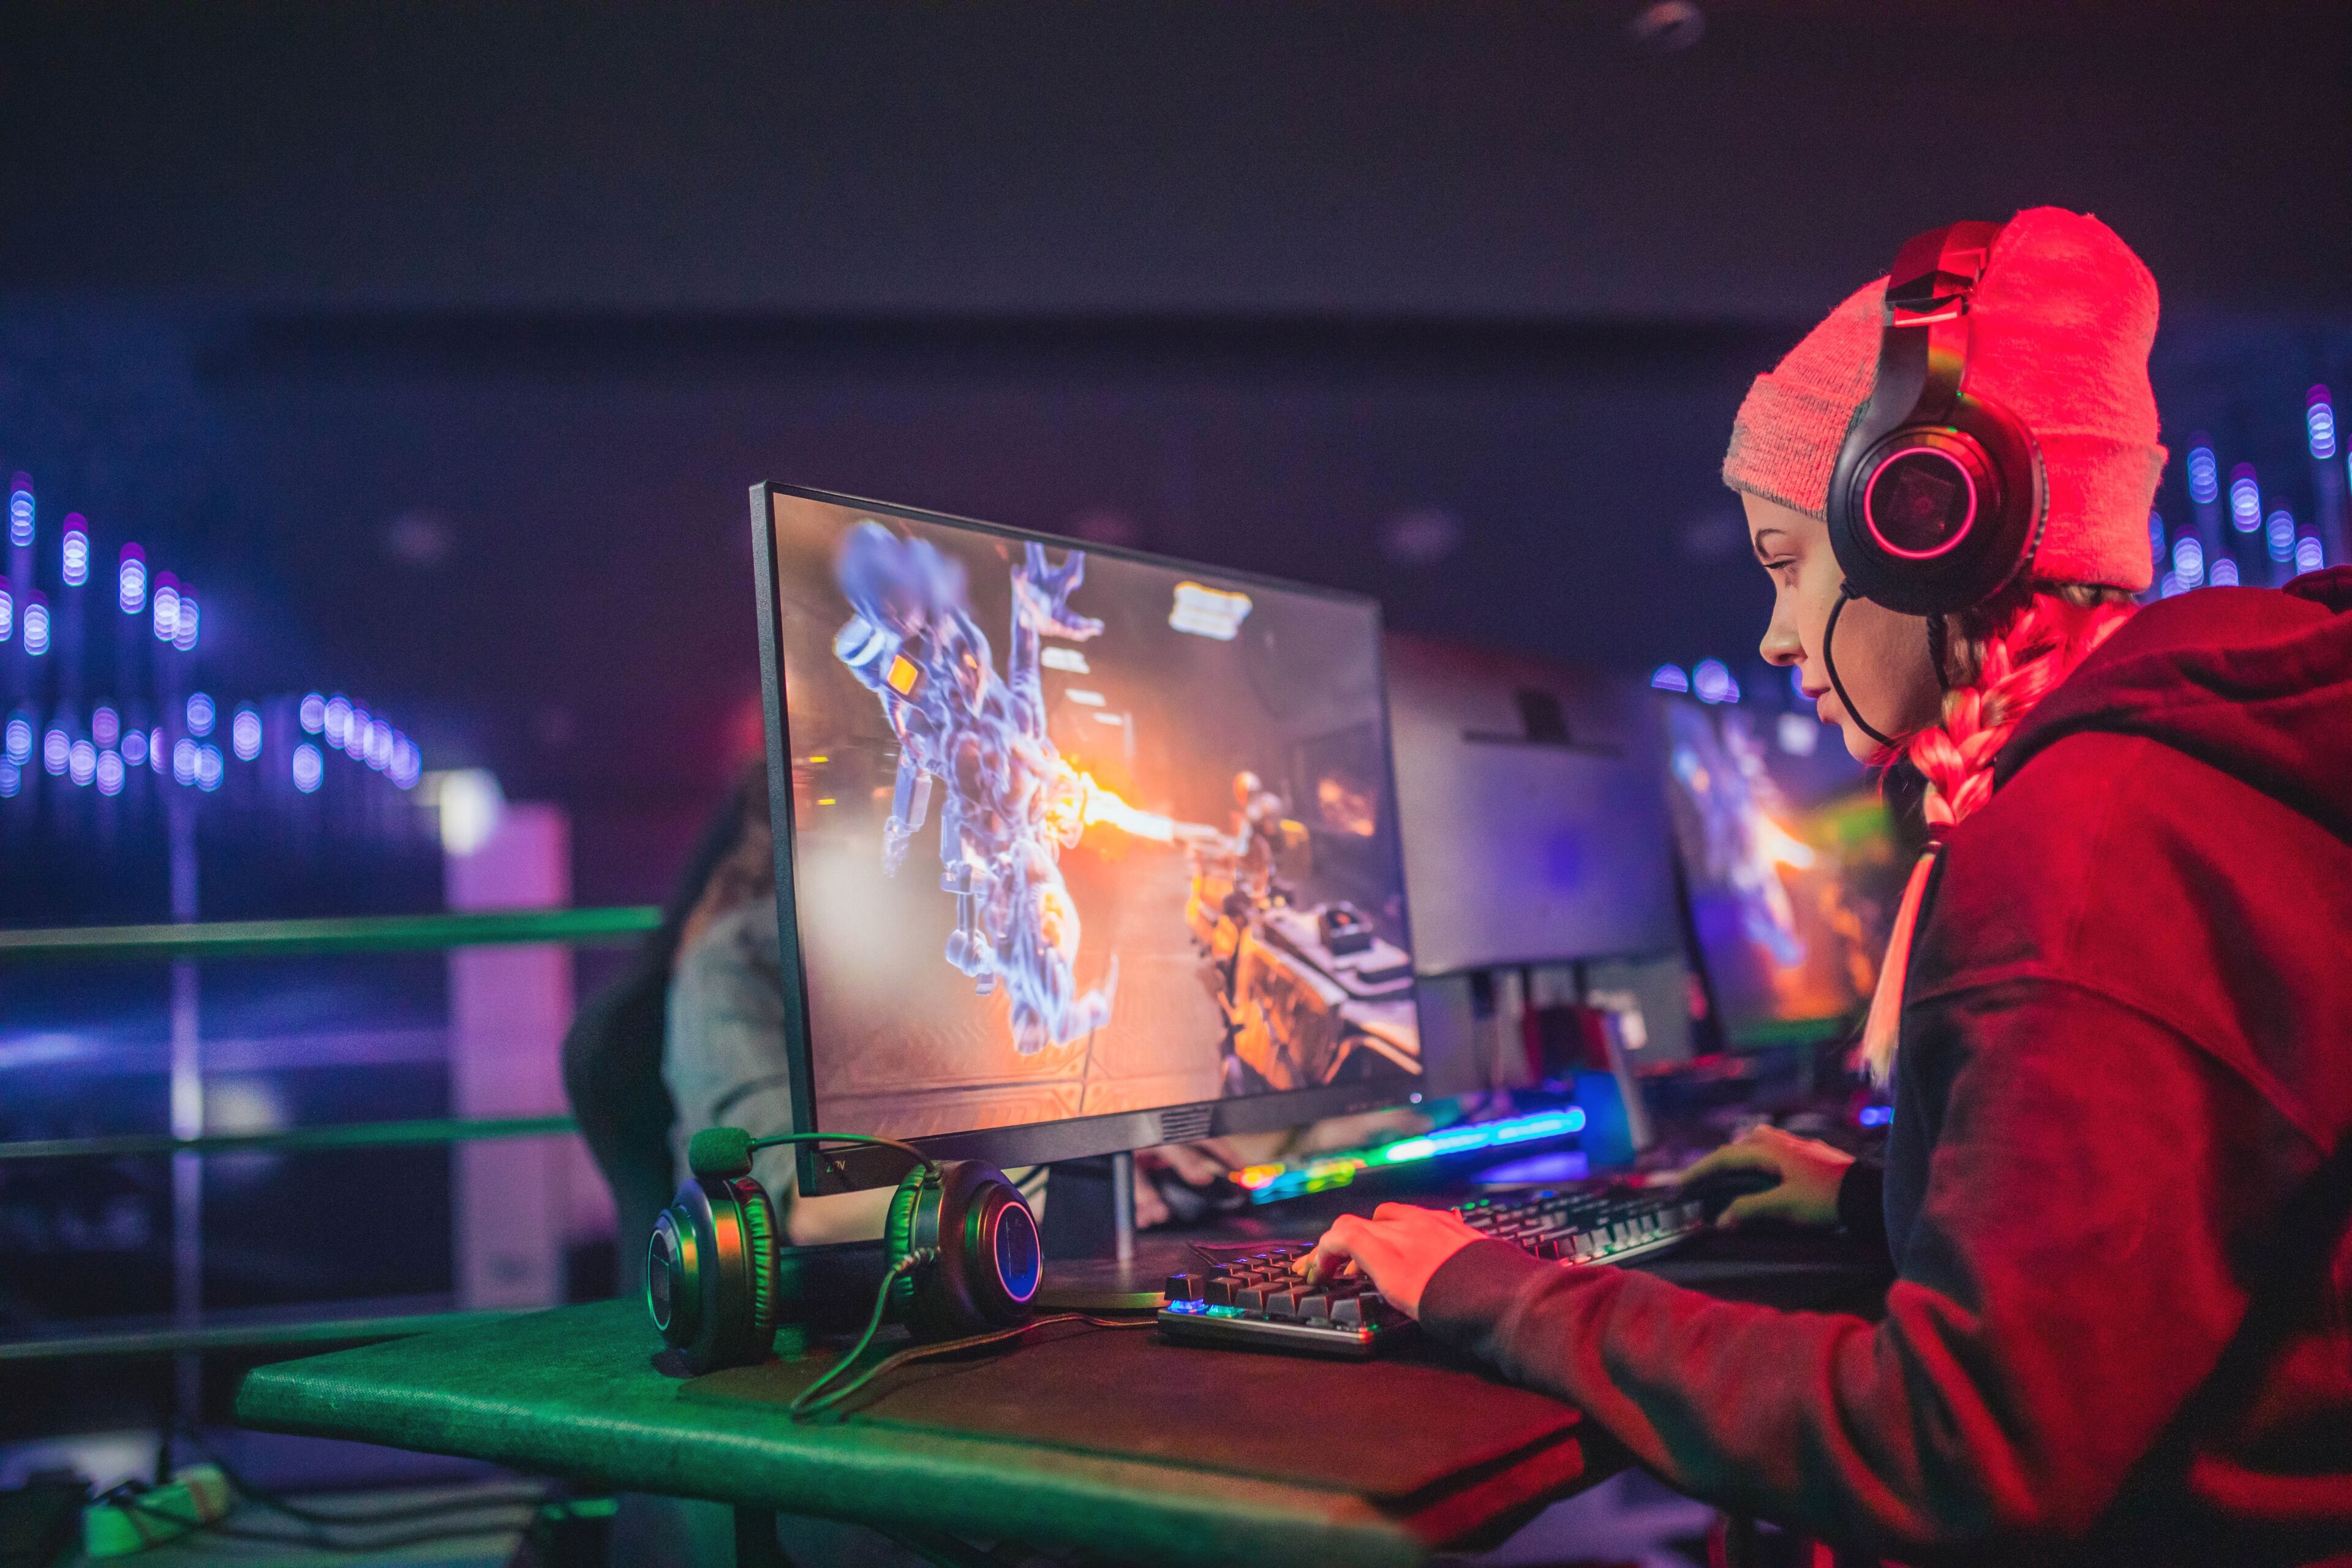 A focused gamer wearing a red beanie and headphones plays a competitive video game at an illuminated eSports arena.